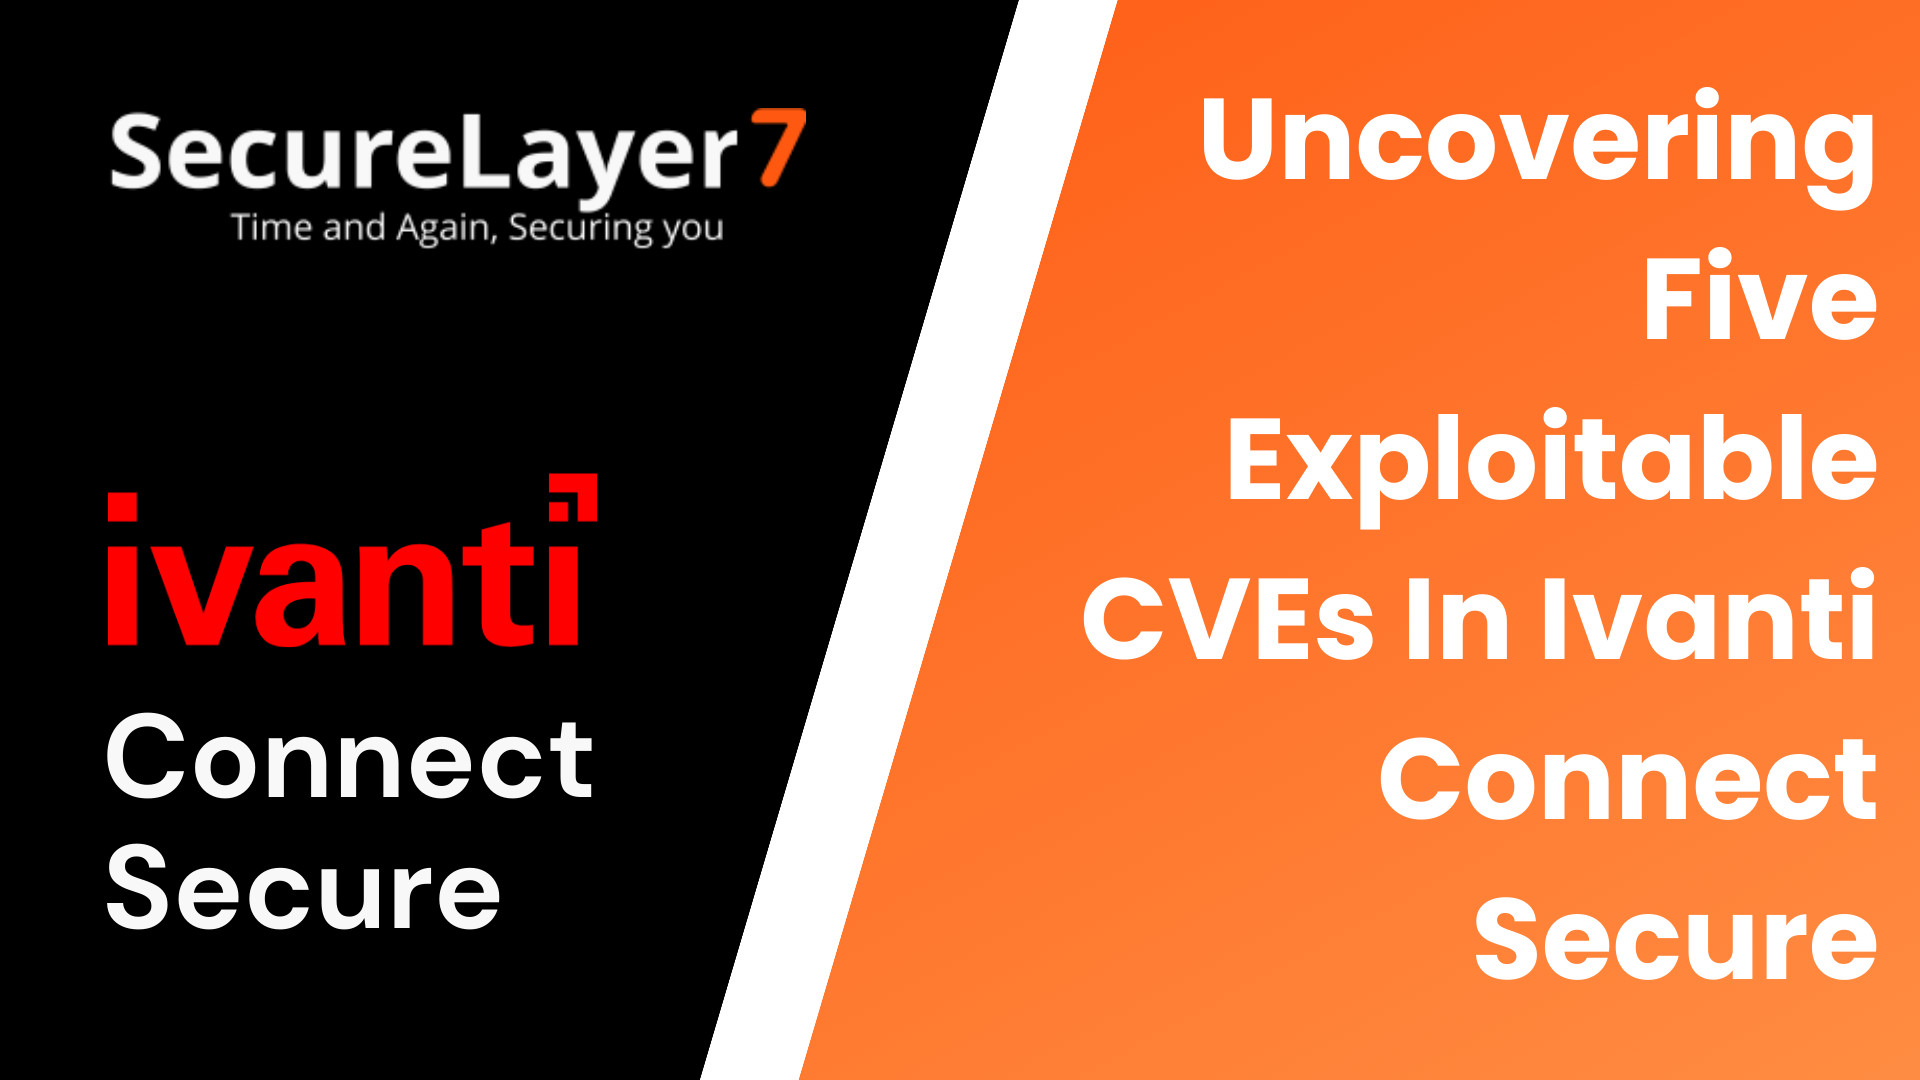 Ivanti Connect Secure Under Attack: Uncovering Five Exploitable CVEs